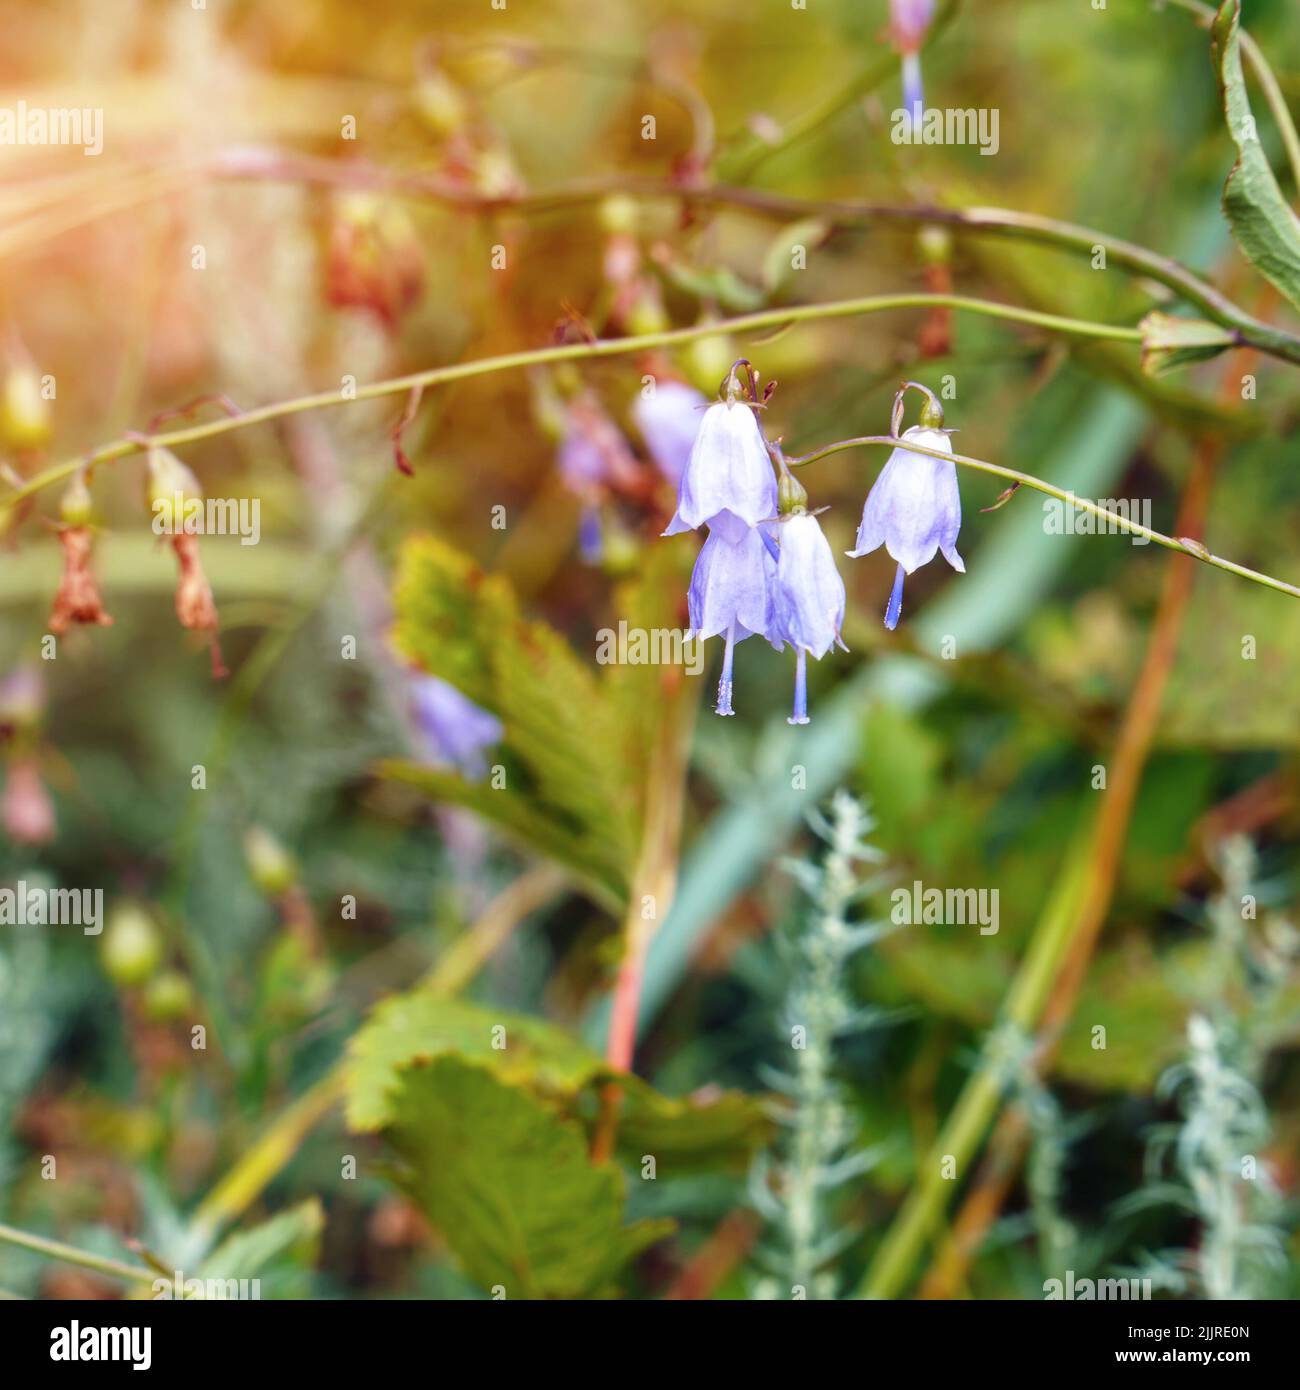 Blue flowers of the forest ladybells on a natural background. Adenophora liliifolia Stock Photo